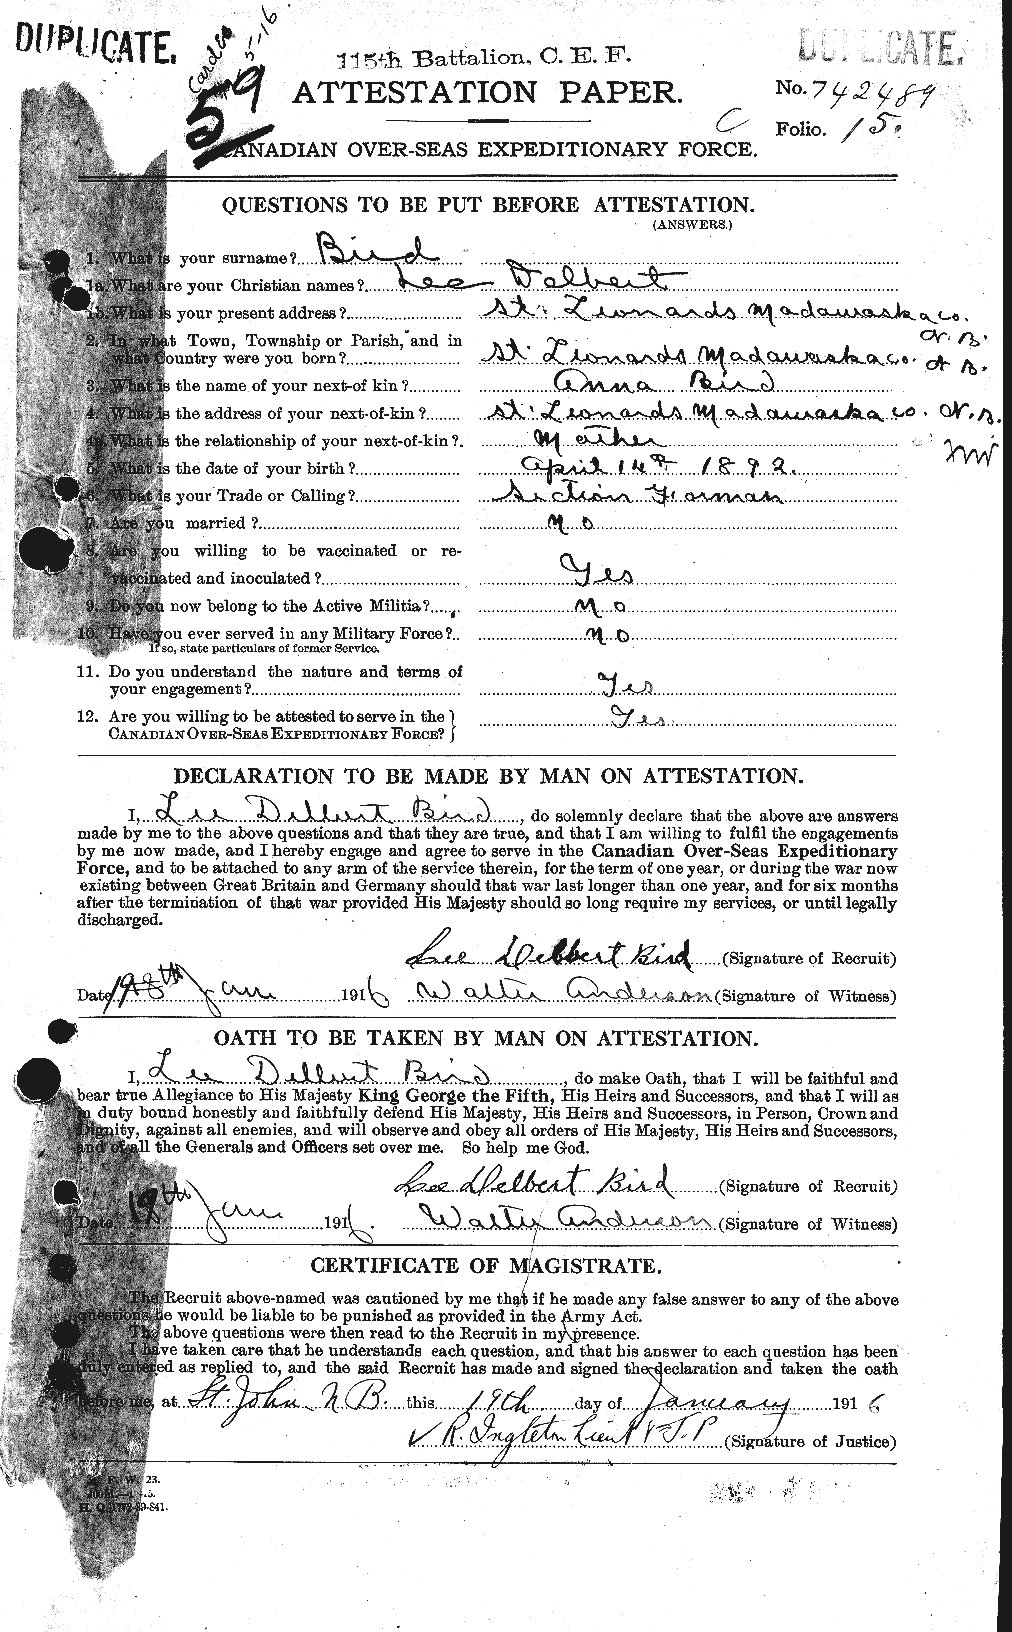 Personnel Records of the First World War - CEF 239475a